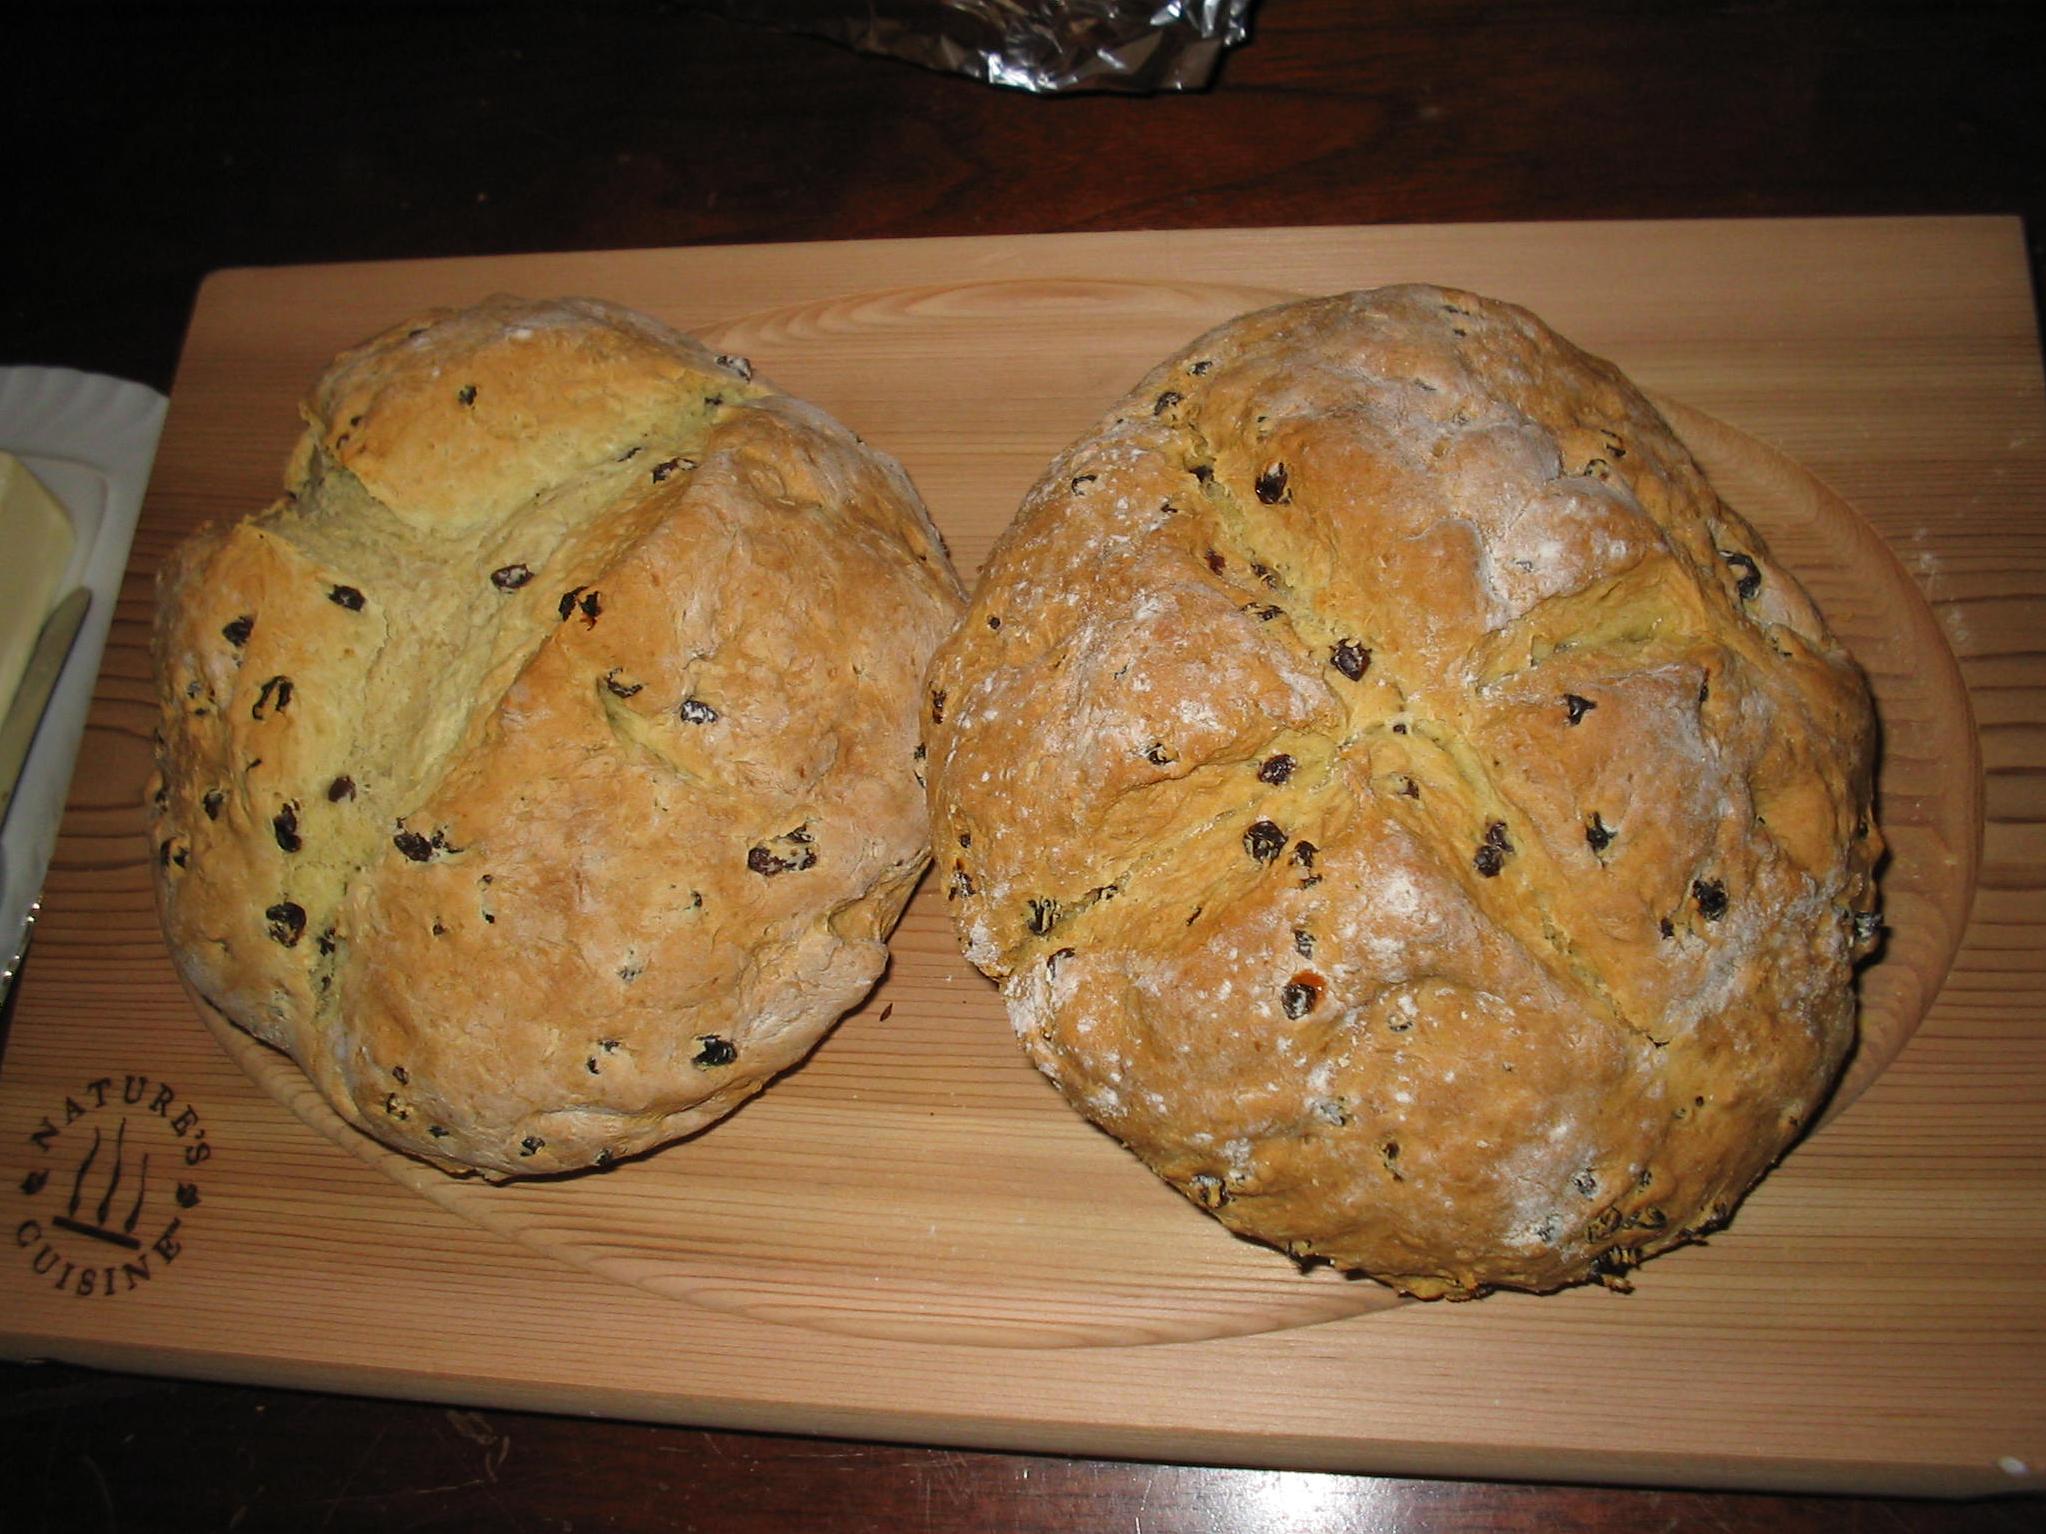  A warm slice of delicious Irish soda bread fresh out of the oven.